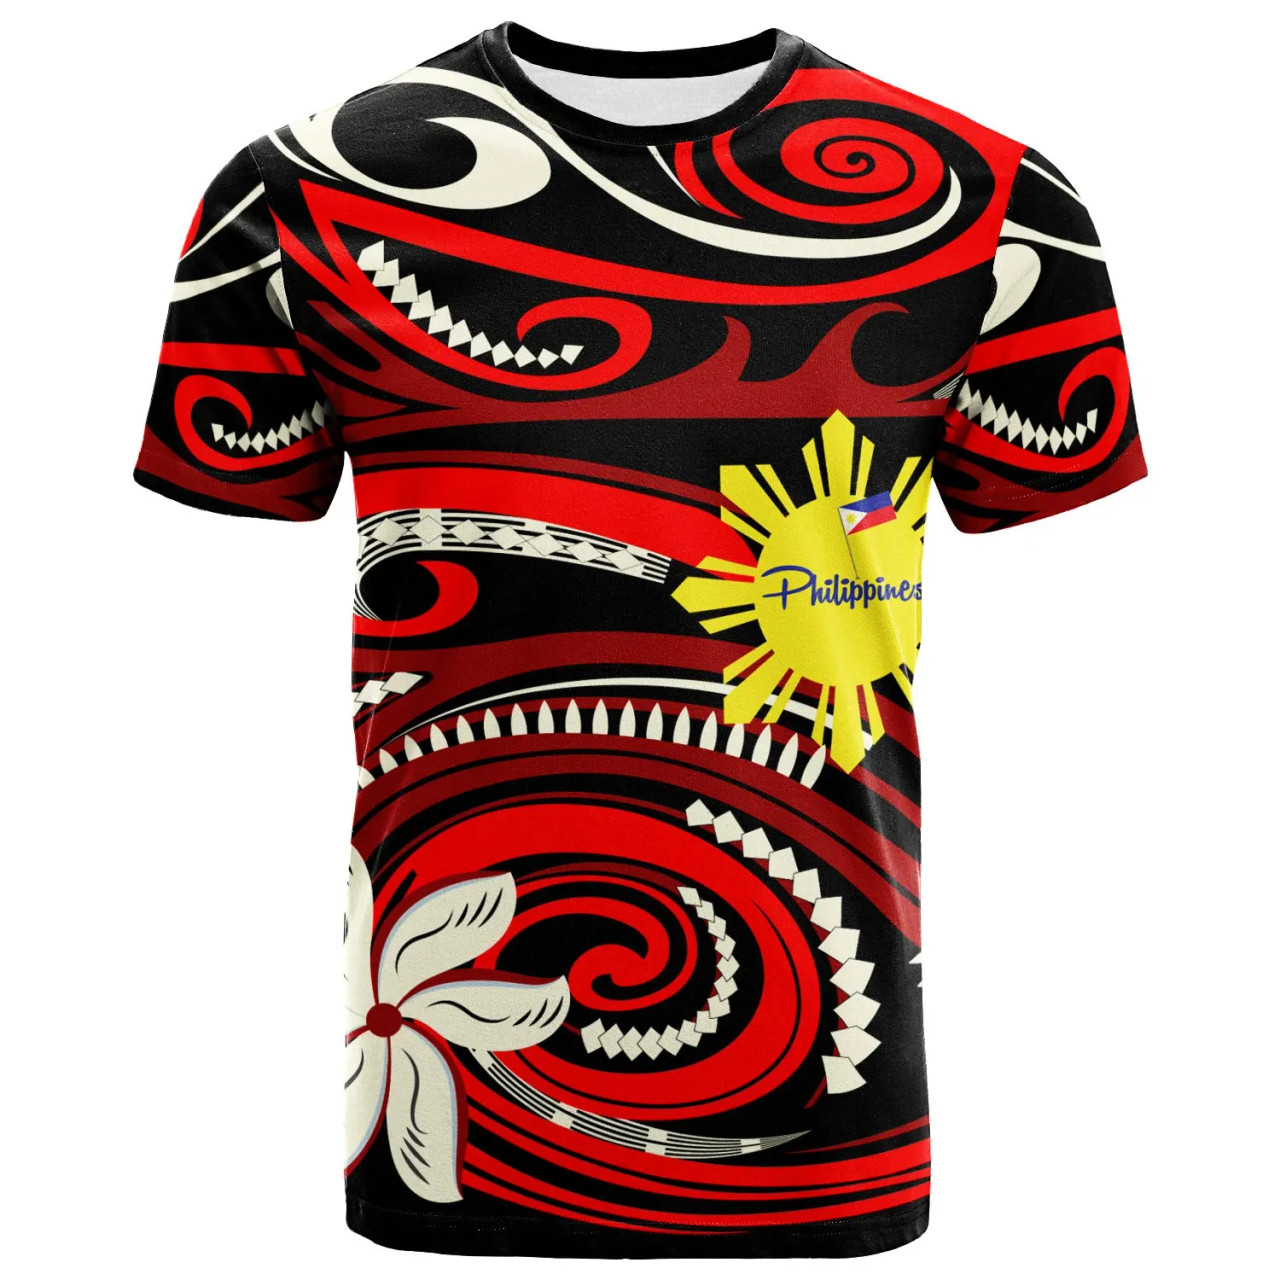 Philippines T-Shirt - Vortex Style Red Color 1